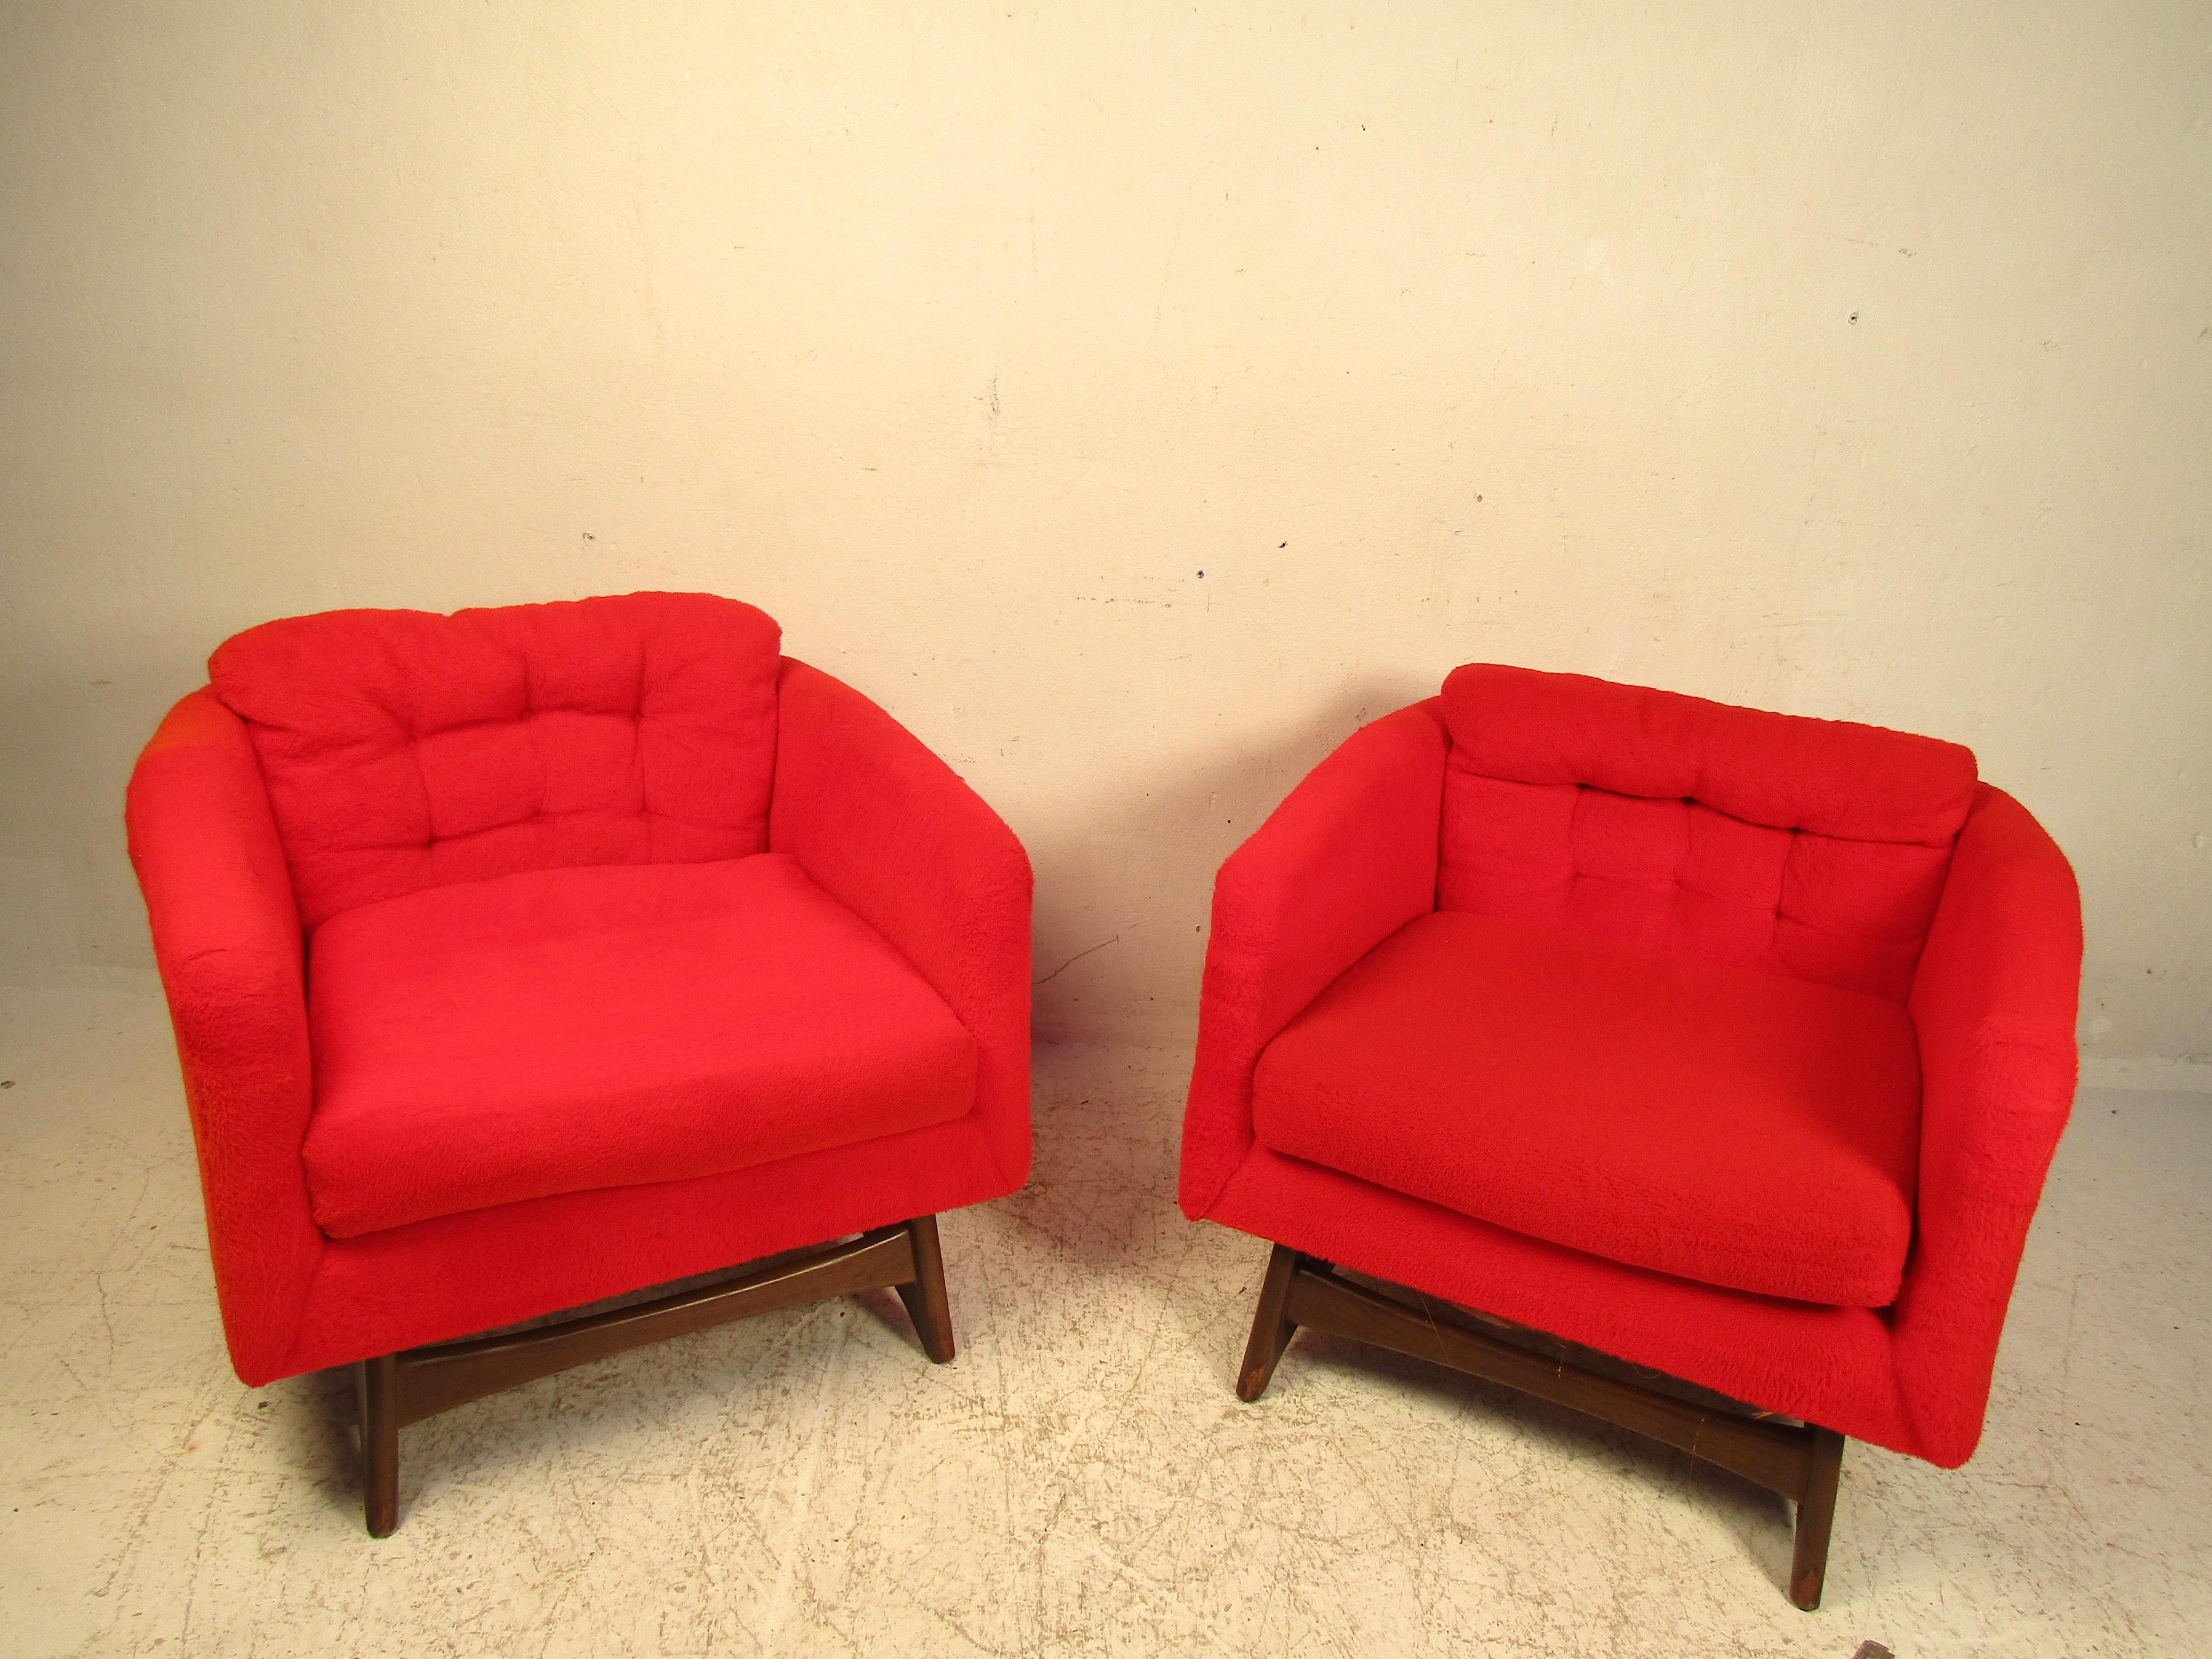 This pair of bold red lounge chairs are done in the styling of famed designer Adrian Pearsall. Featuring bold design and eye-catching style this set will add a fun flair to any living room or bedroom space. Great for entertaining or simply reading a